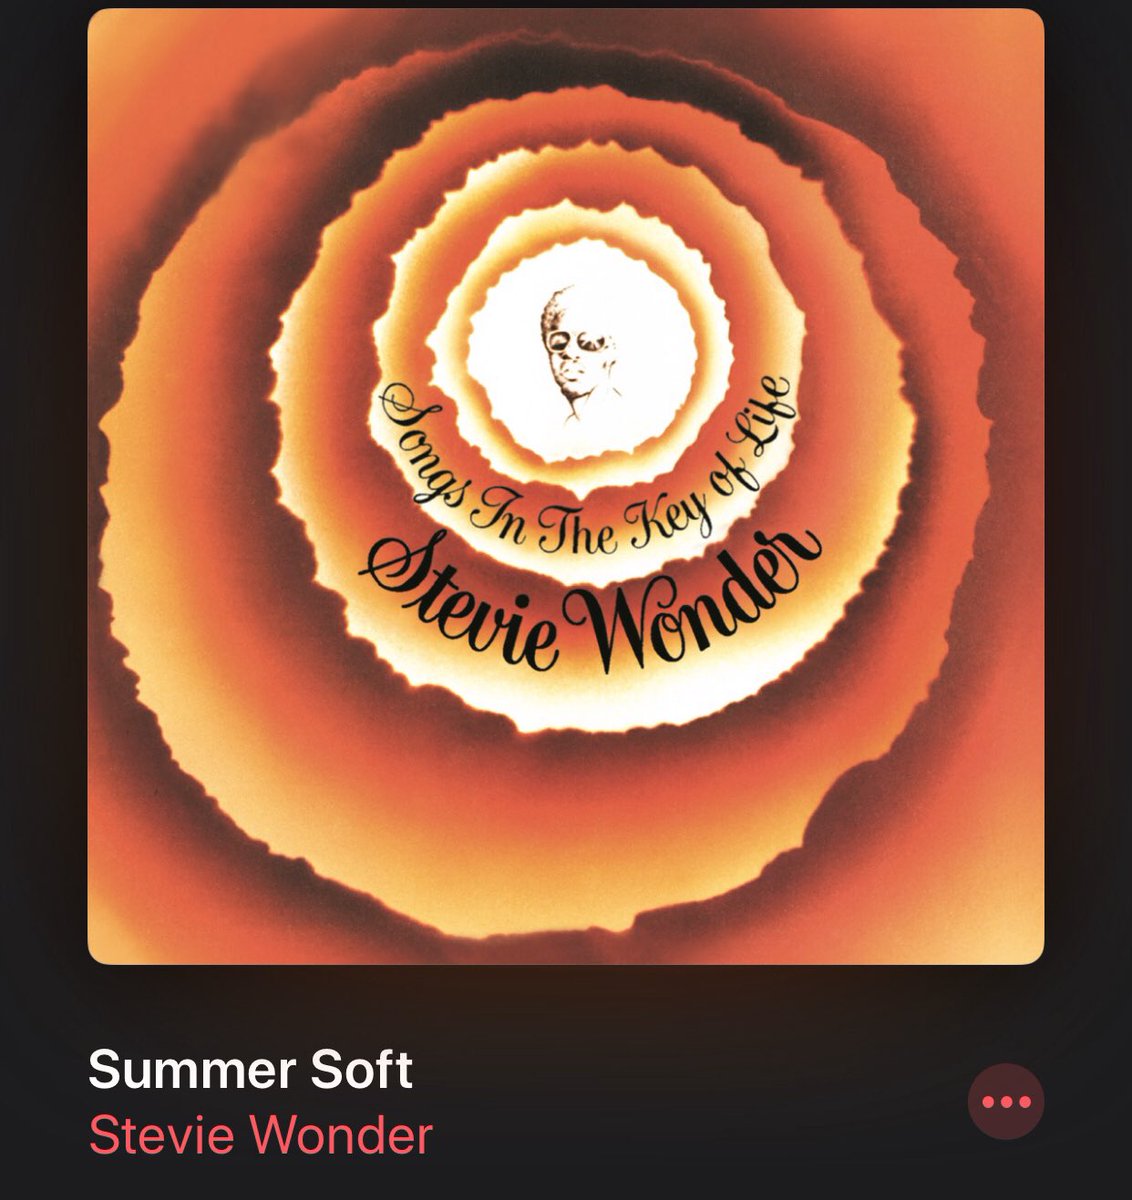 Next, we have “Summer Soft”. Again, perfectly written. On the surface describing the coming & going of seasons, it could be an analogy for something more.